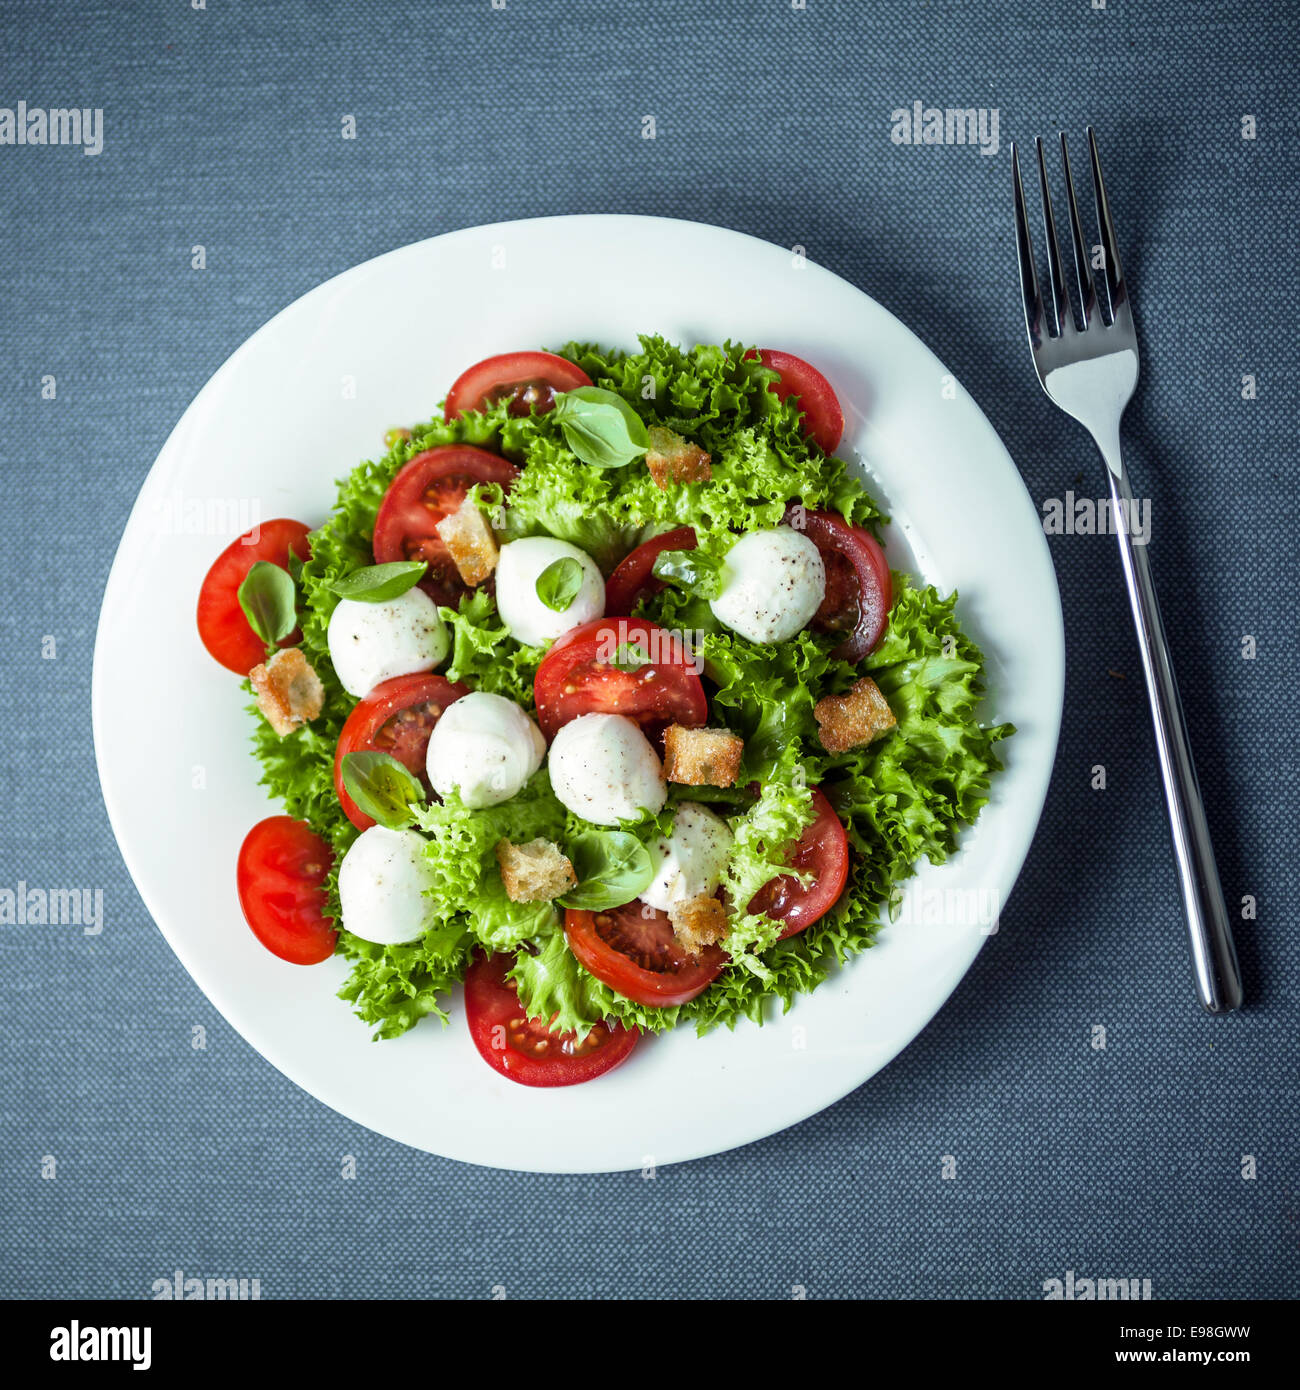 Mozzarella salad with crunchy fried croutons, tomato and frilly lettuce garnished with fresh basil leaves, overhead view Stock Photo